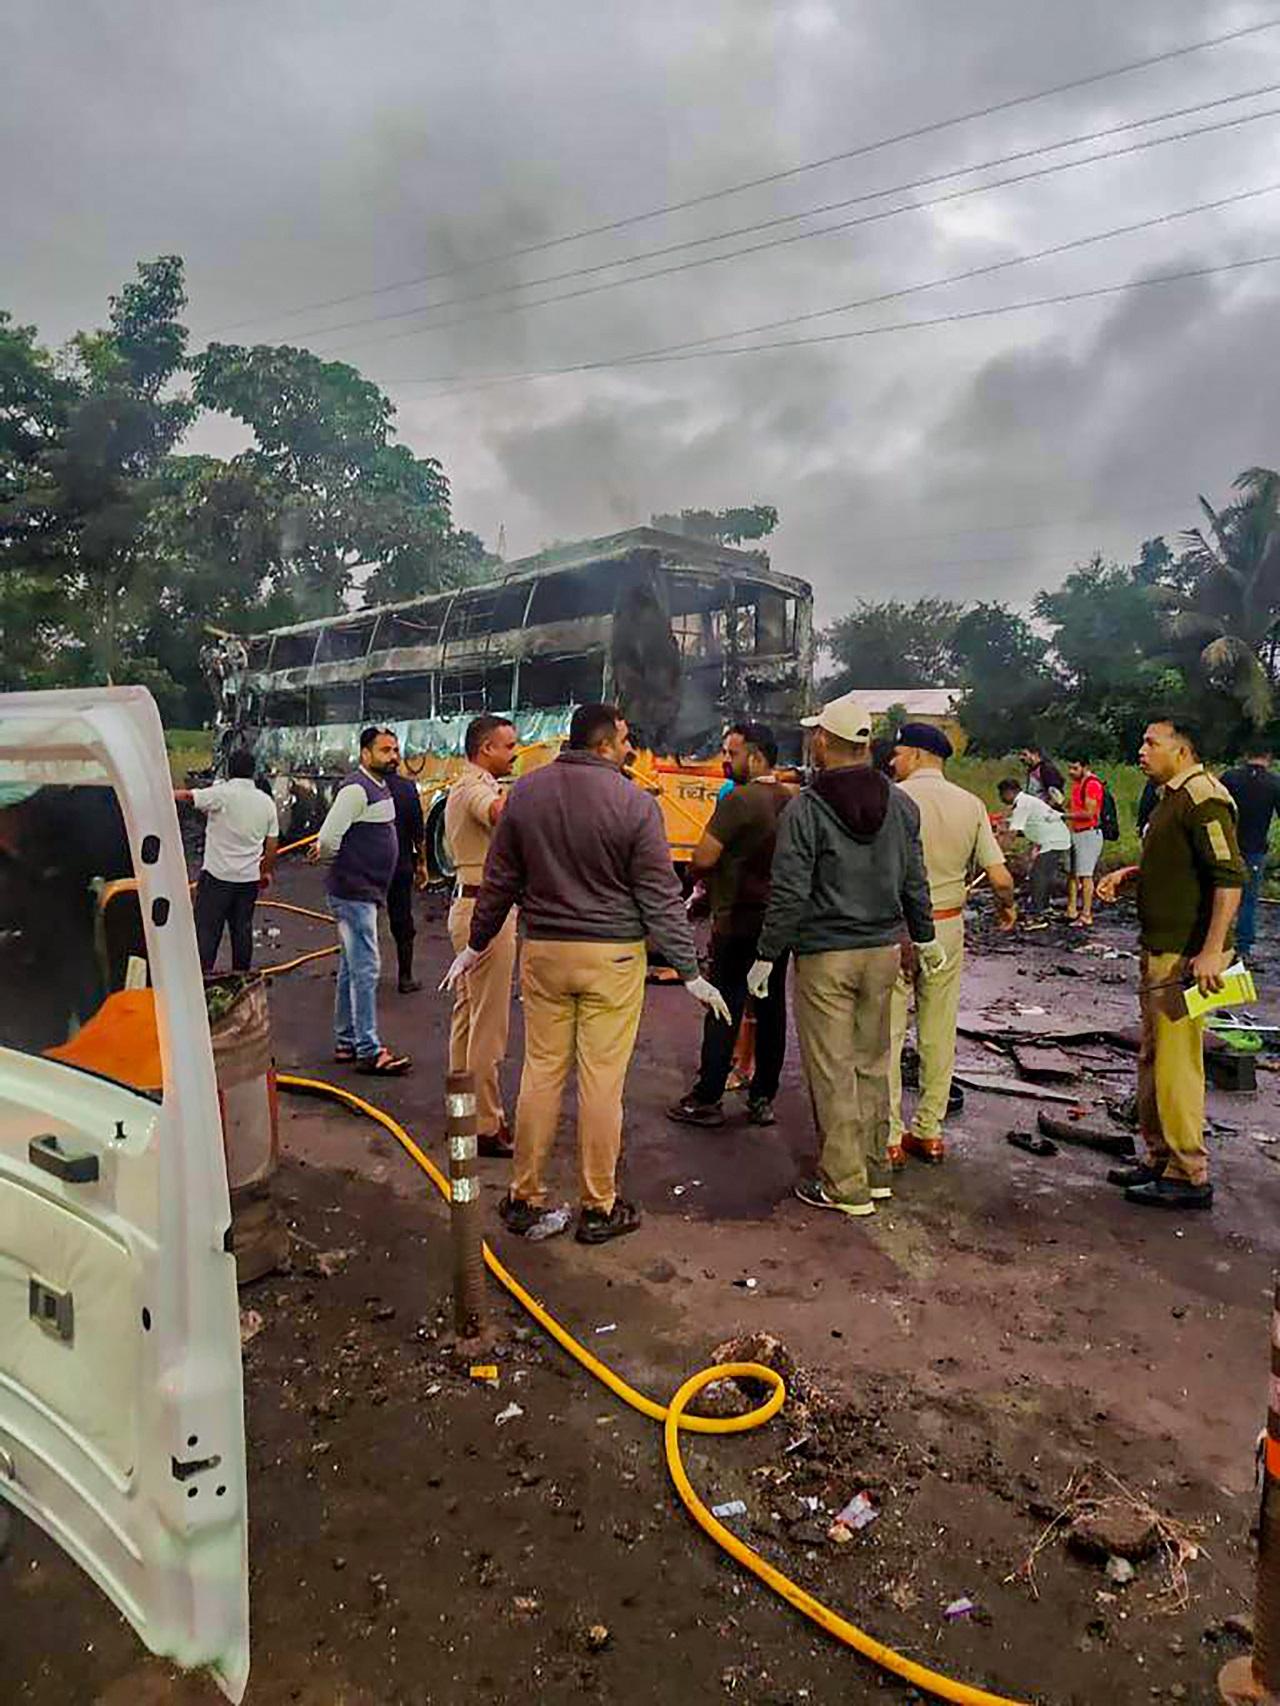 Before catching fire, the bus also hit a mini cargo van, due to which it got overturned, the commissioner added. (Pic/Pallav Paliwal)